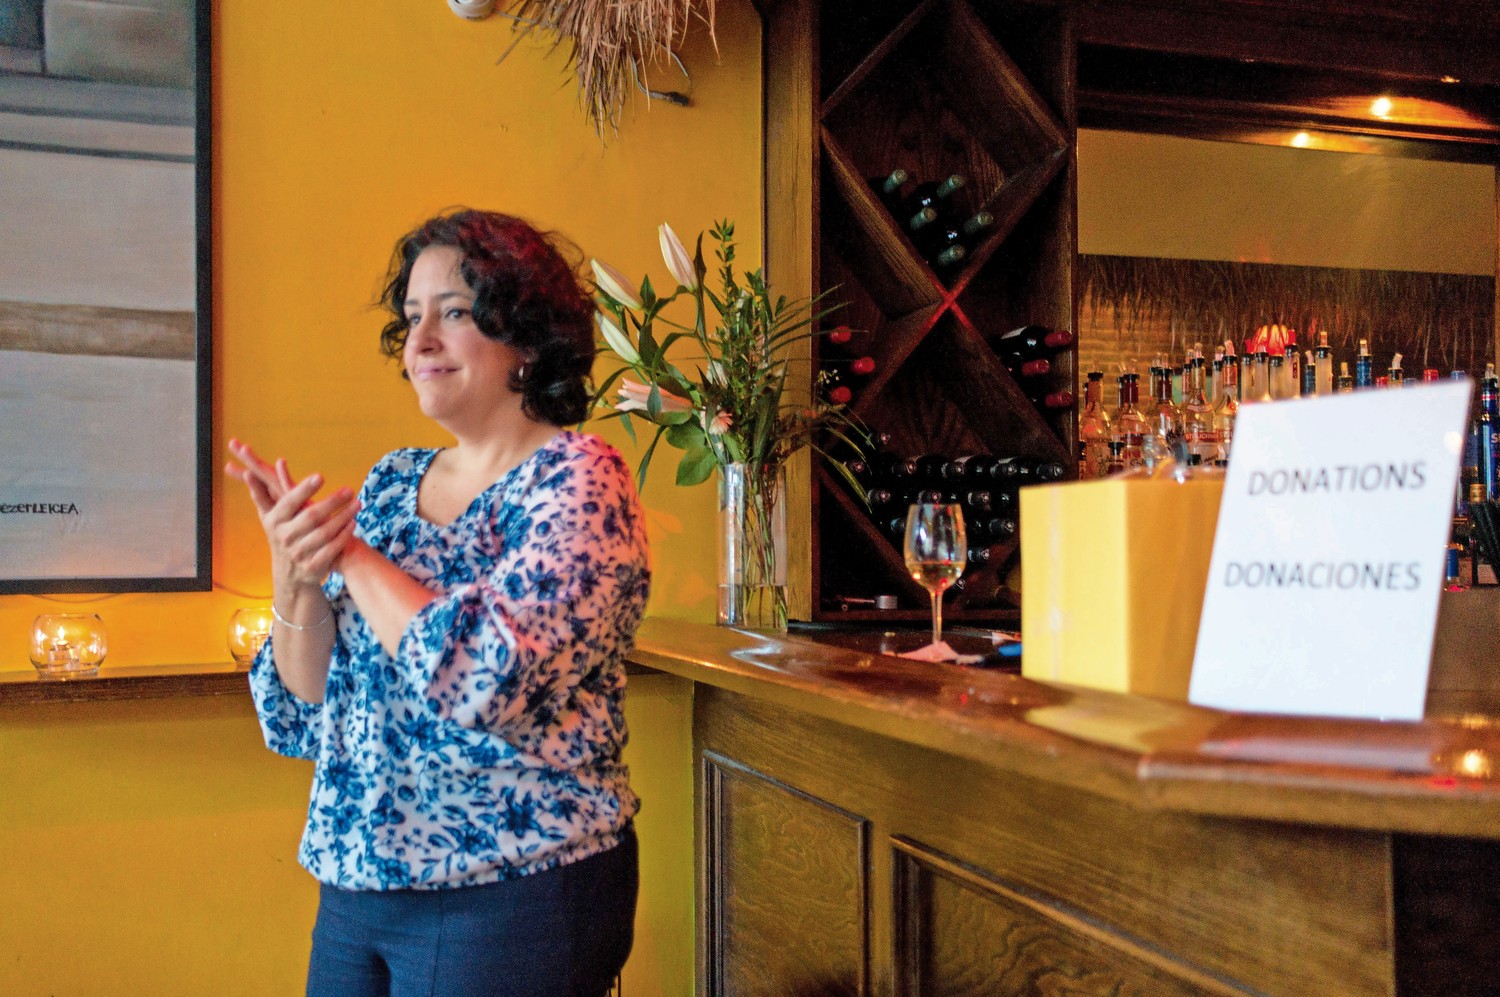 Teresita Levy, a professor of Latin American studies at Lehman College, claps along to the music of Trio La Cumbancha at Amor Cubano, a Cuban restaurant in Harlem. Levy held a fundraiser at the restaurant for a weeklong trip she and her students are planning as part of their coursework.